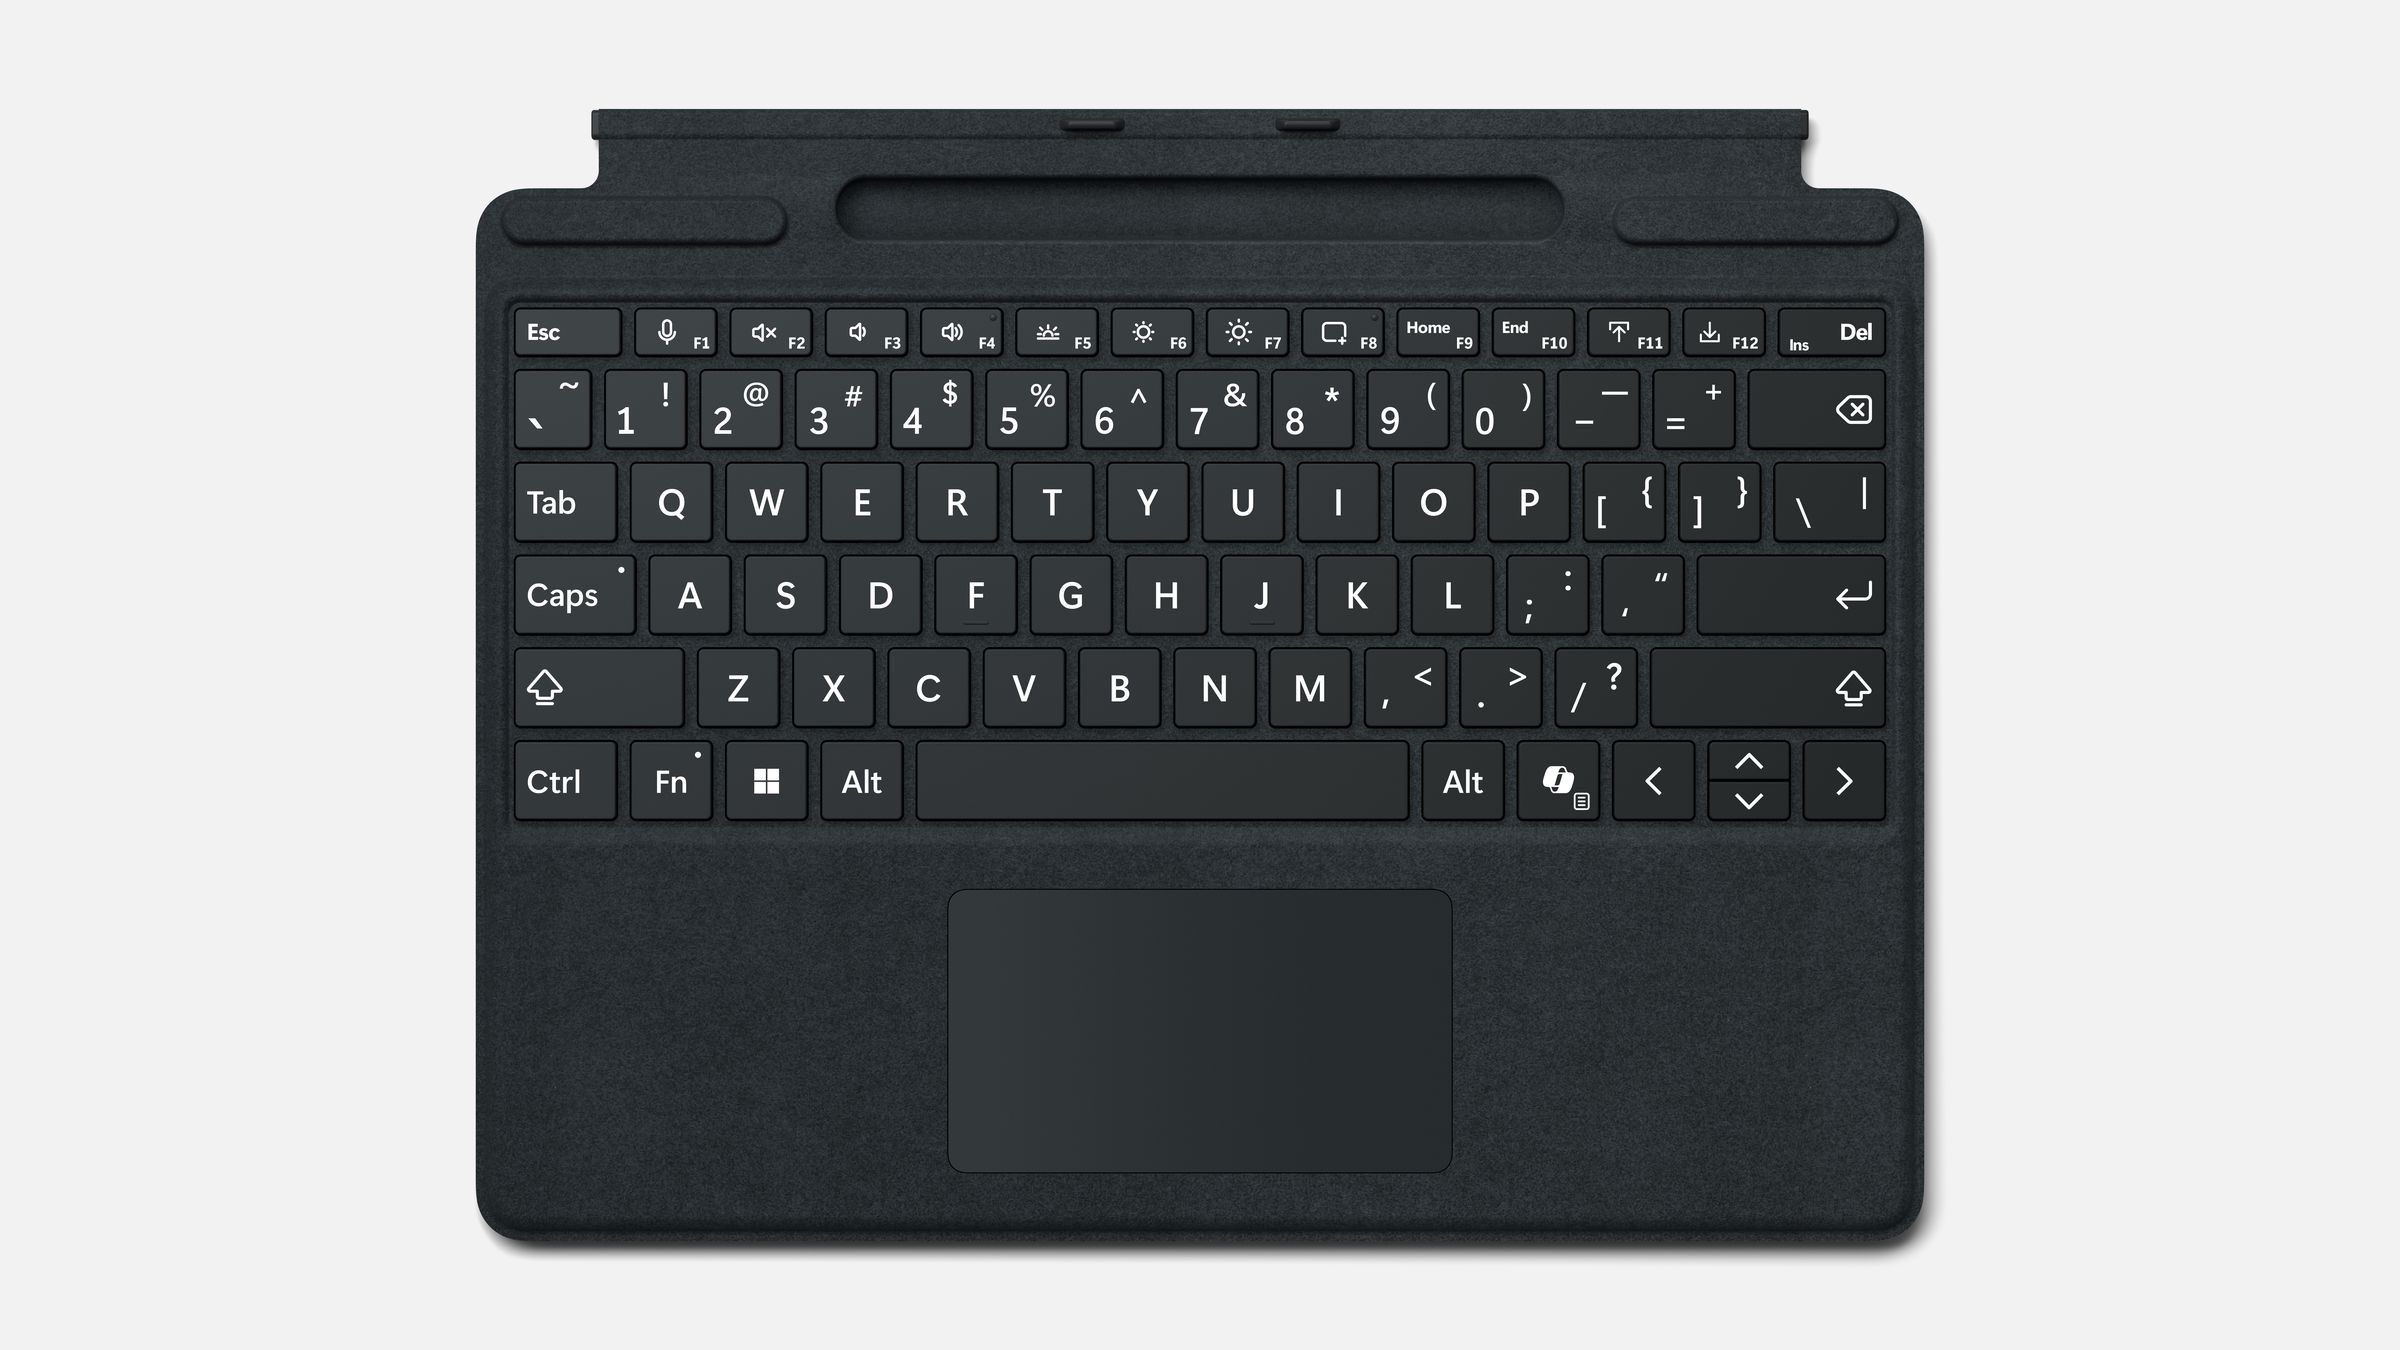 The new Surface Pro keyboard has a bold keyset and the Copilot key.